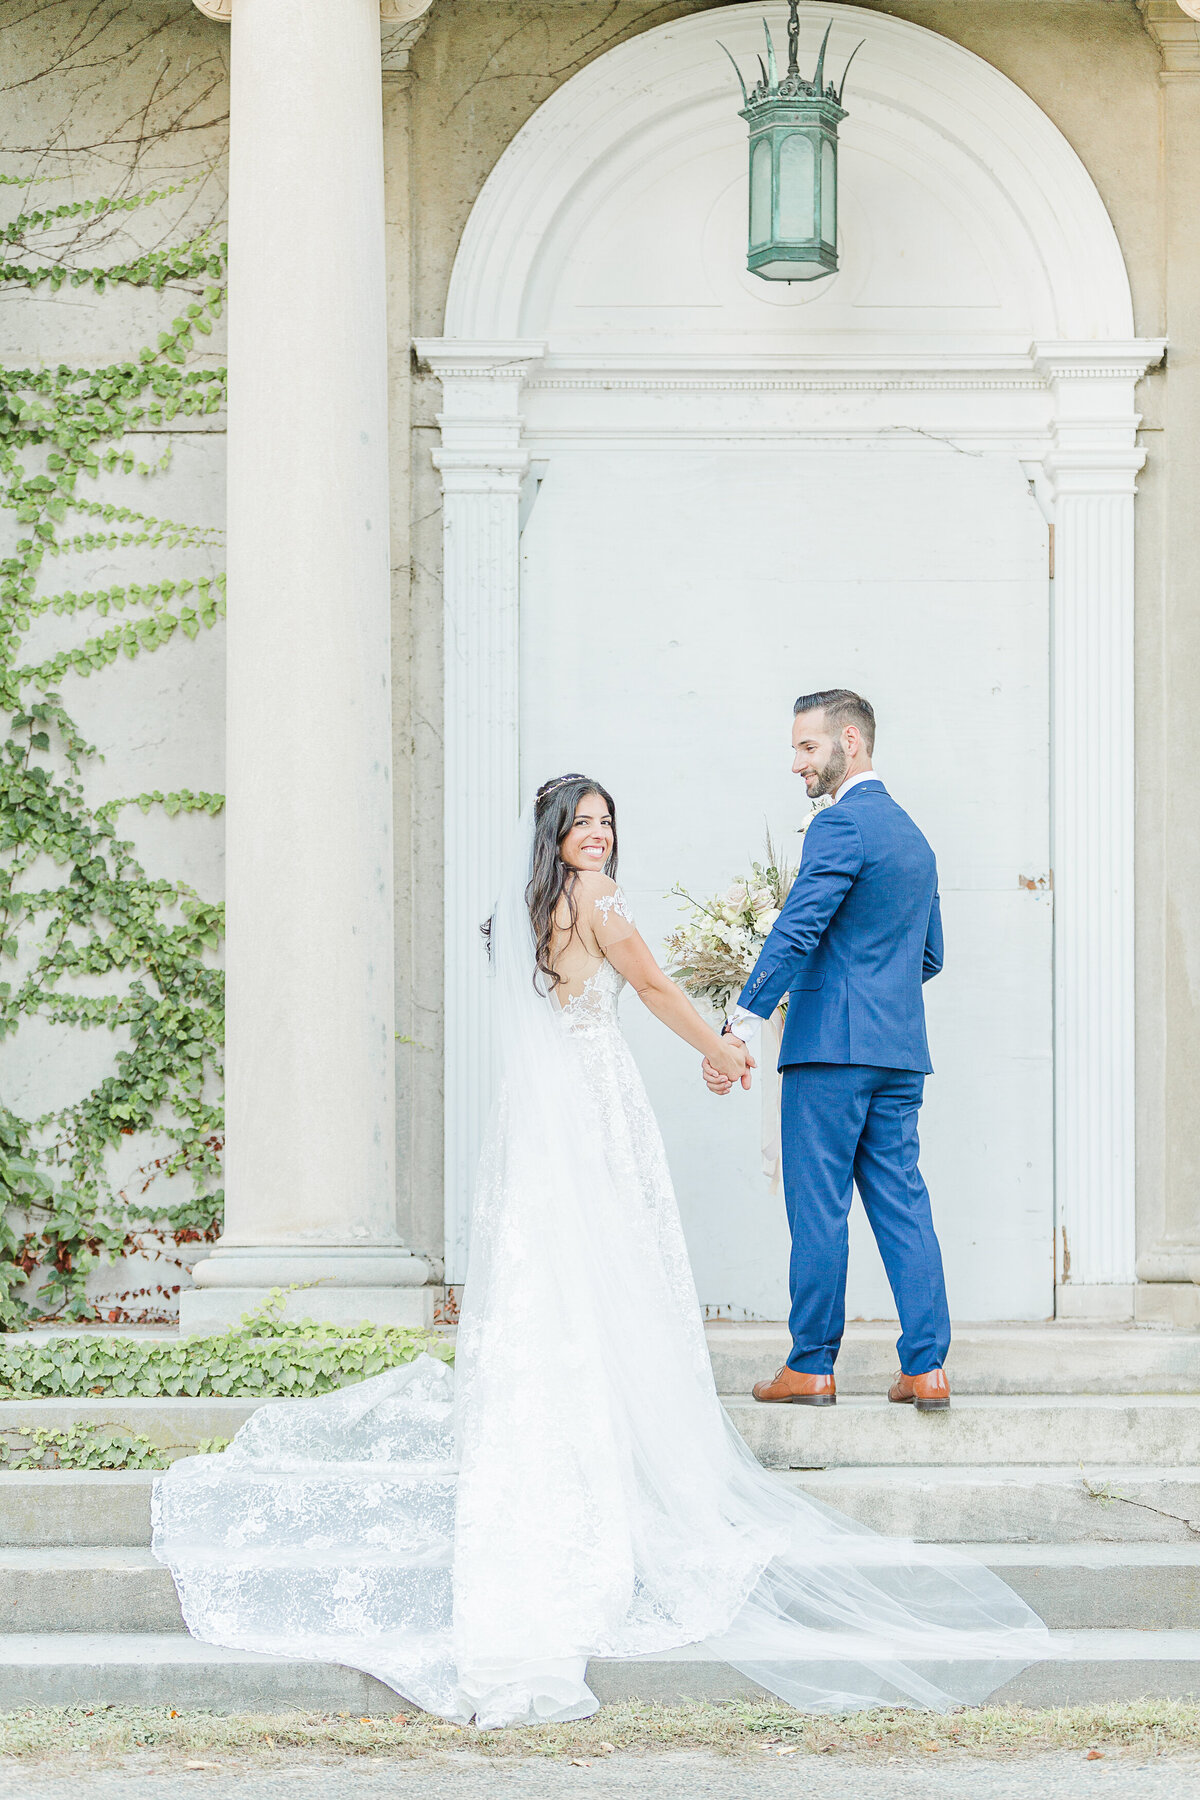 Bride and groom stand on the stone steps at the Eoila Mansion in Connecticut. Their backs are to the camera but are looking over the shoulder so you can see their smiling faces. Captured by New England Wedding Photographer Lia Rose Weddings